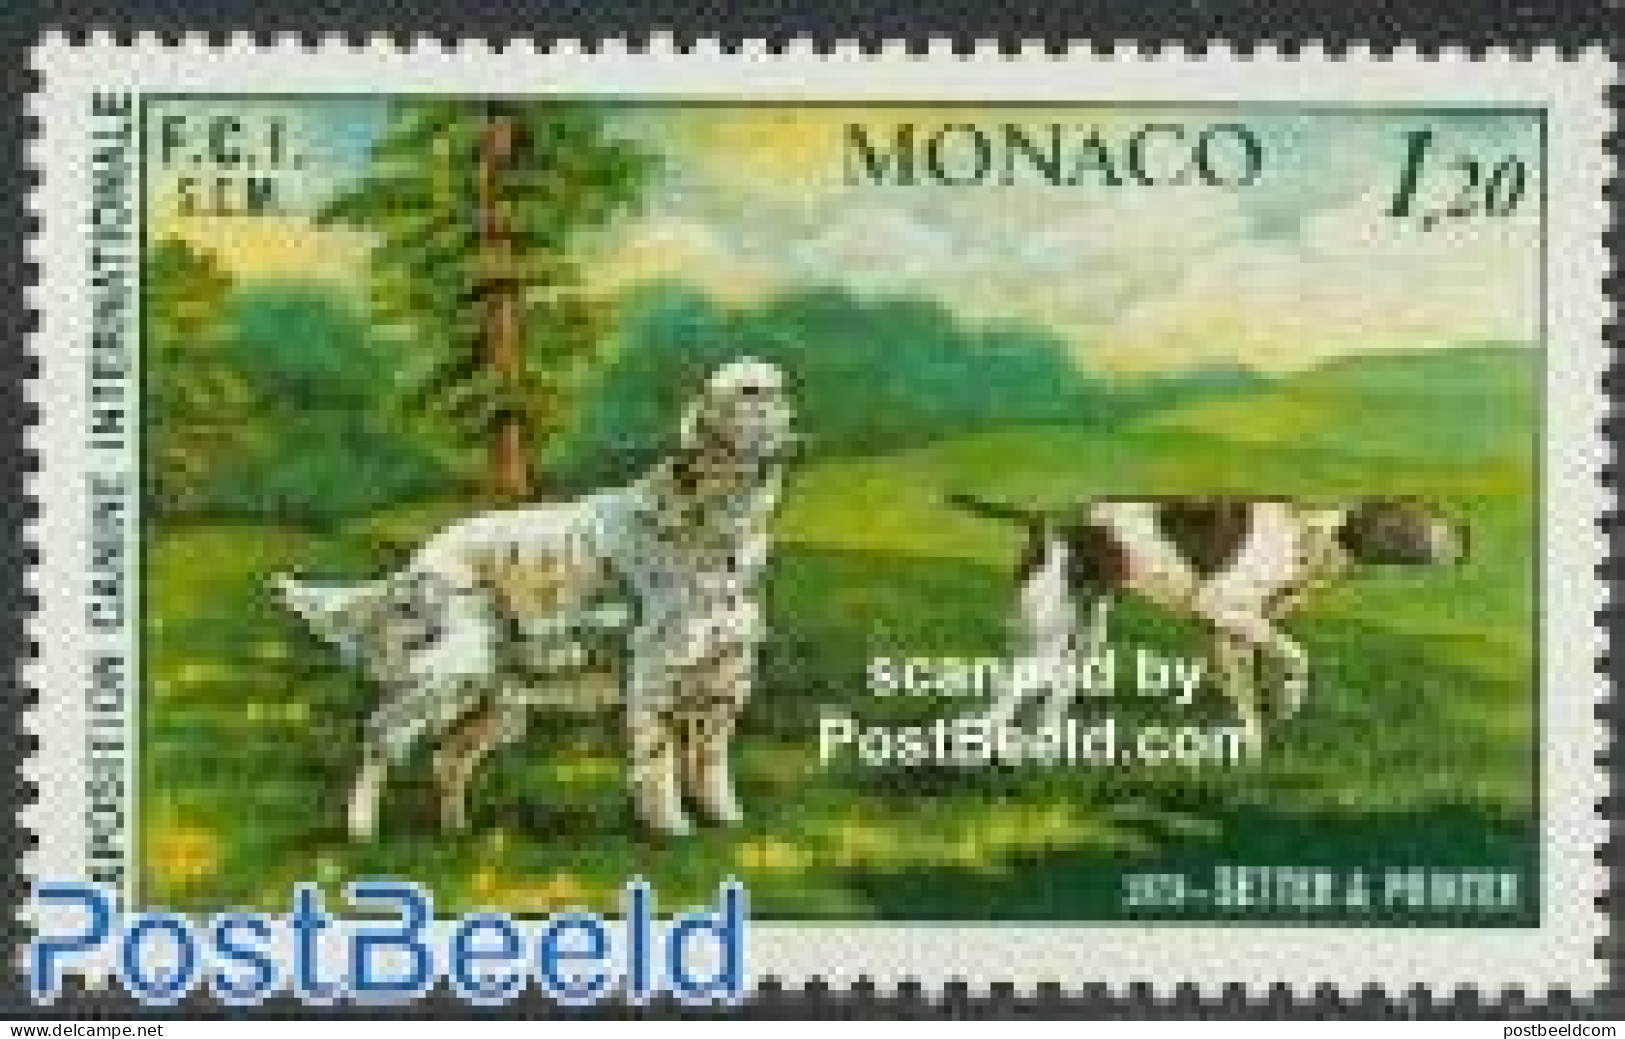 Monaco 1979 Dog Exposition 1v, Mint NH, Nature - Dogs - Unused Stamps